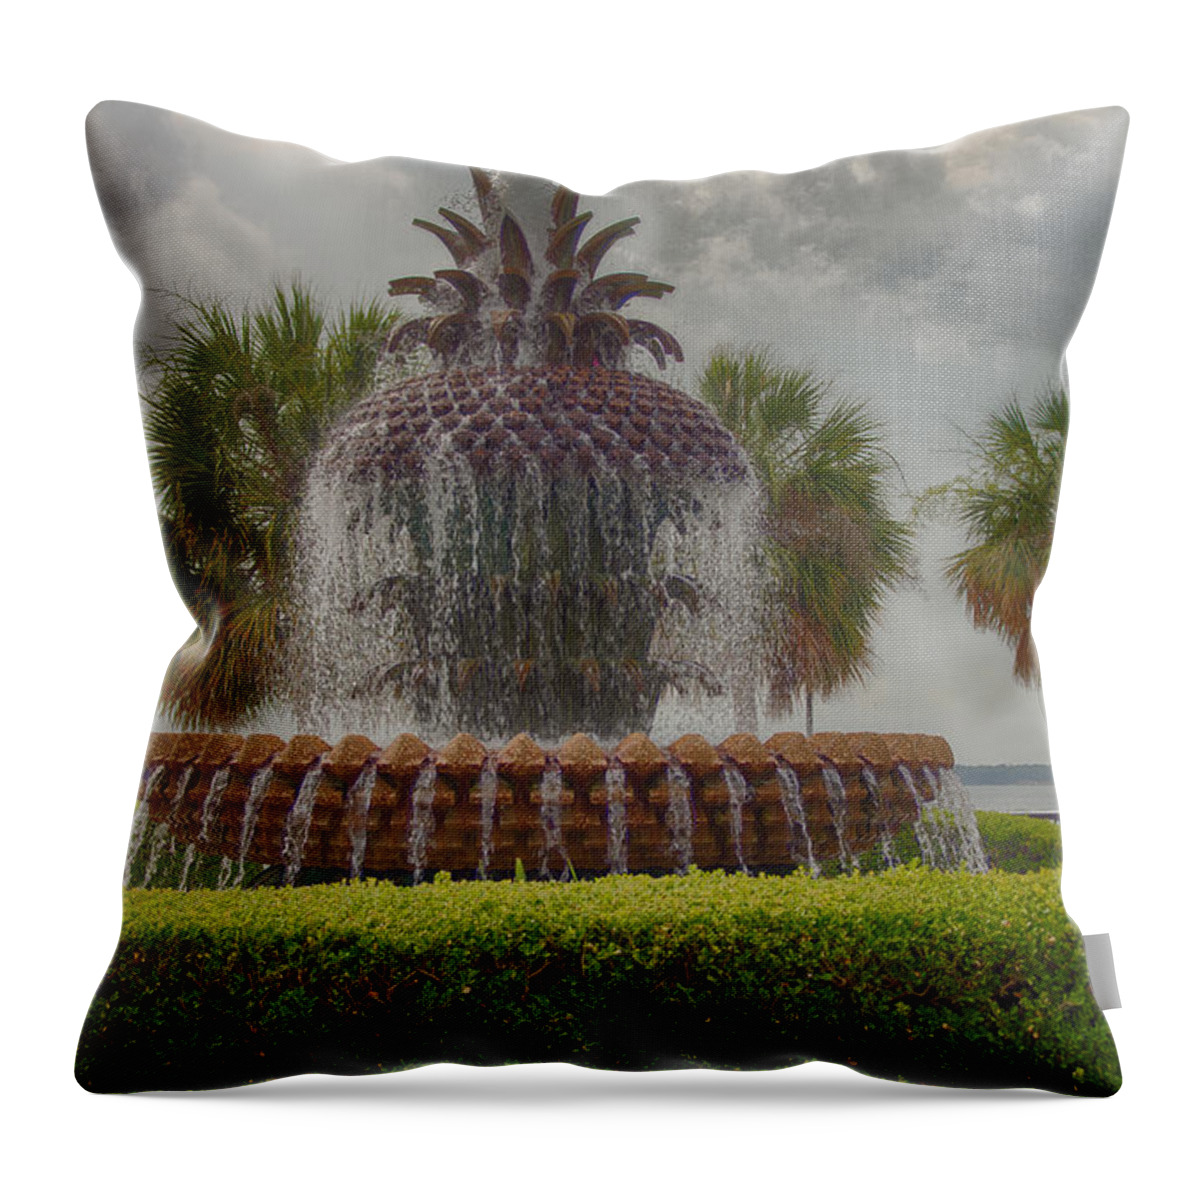 Charleston Throw Pillow featuring the photograph Pineapple Fountain by Bill Barber